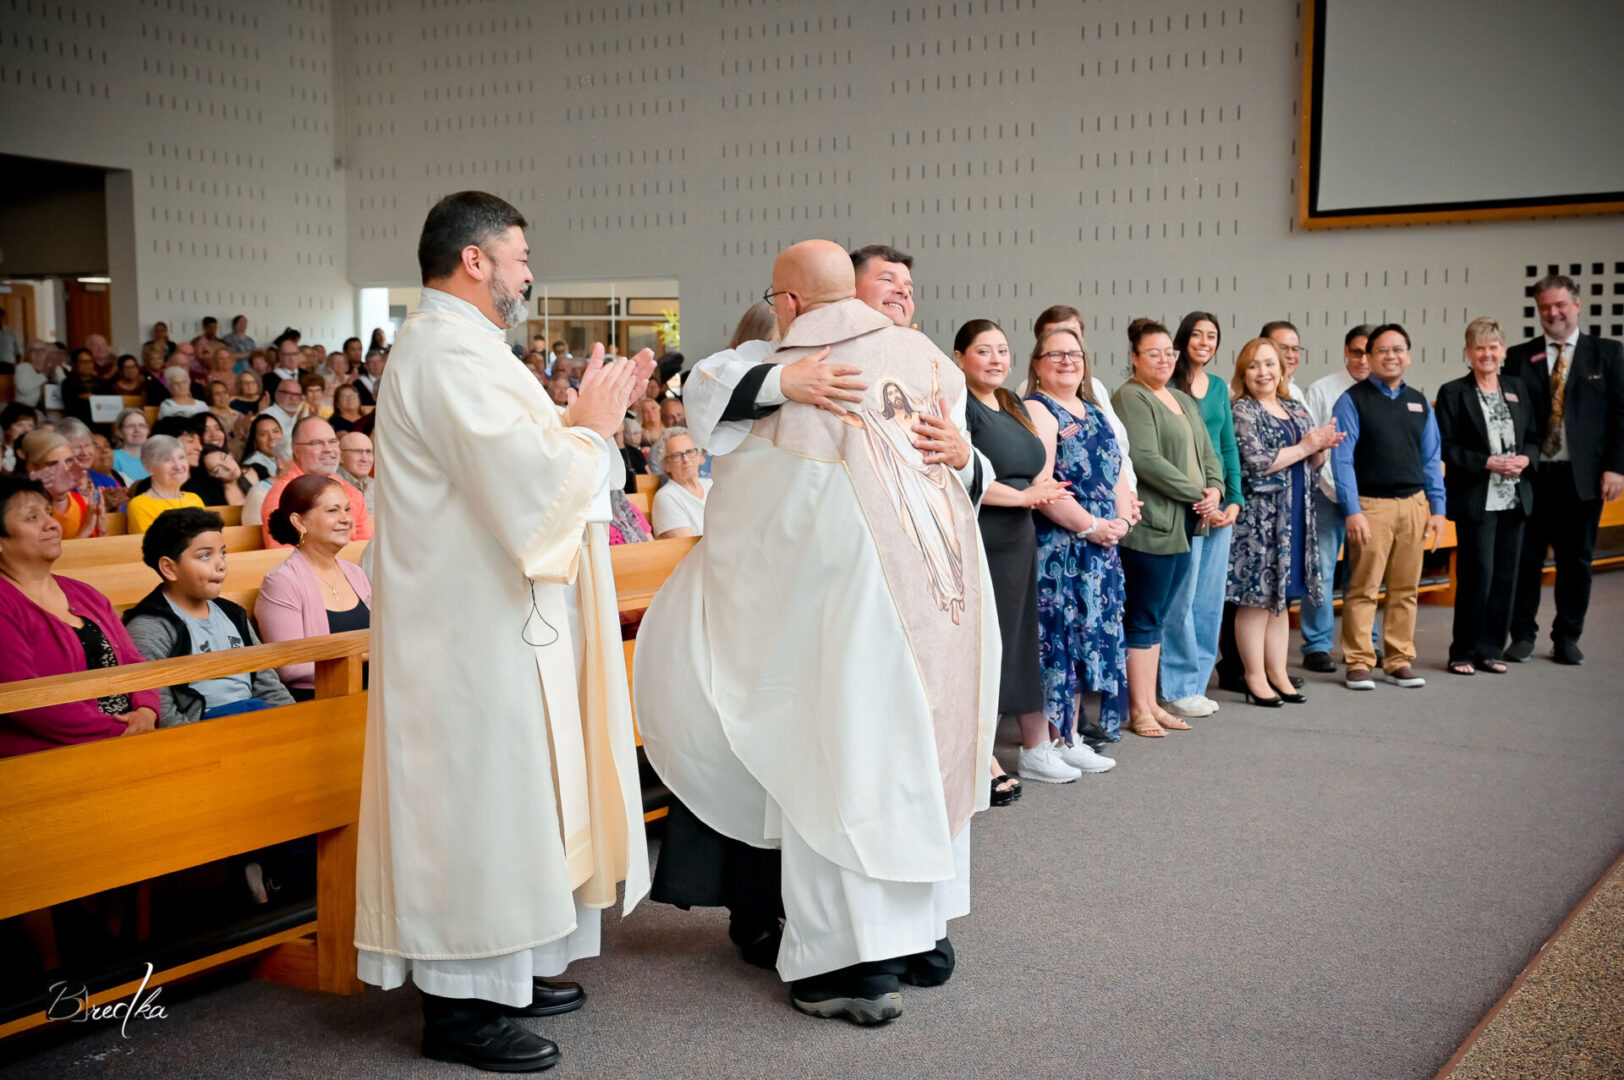 Two priests embrace in church ceremony.